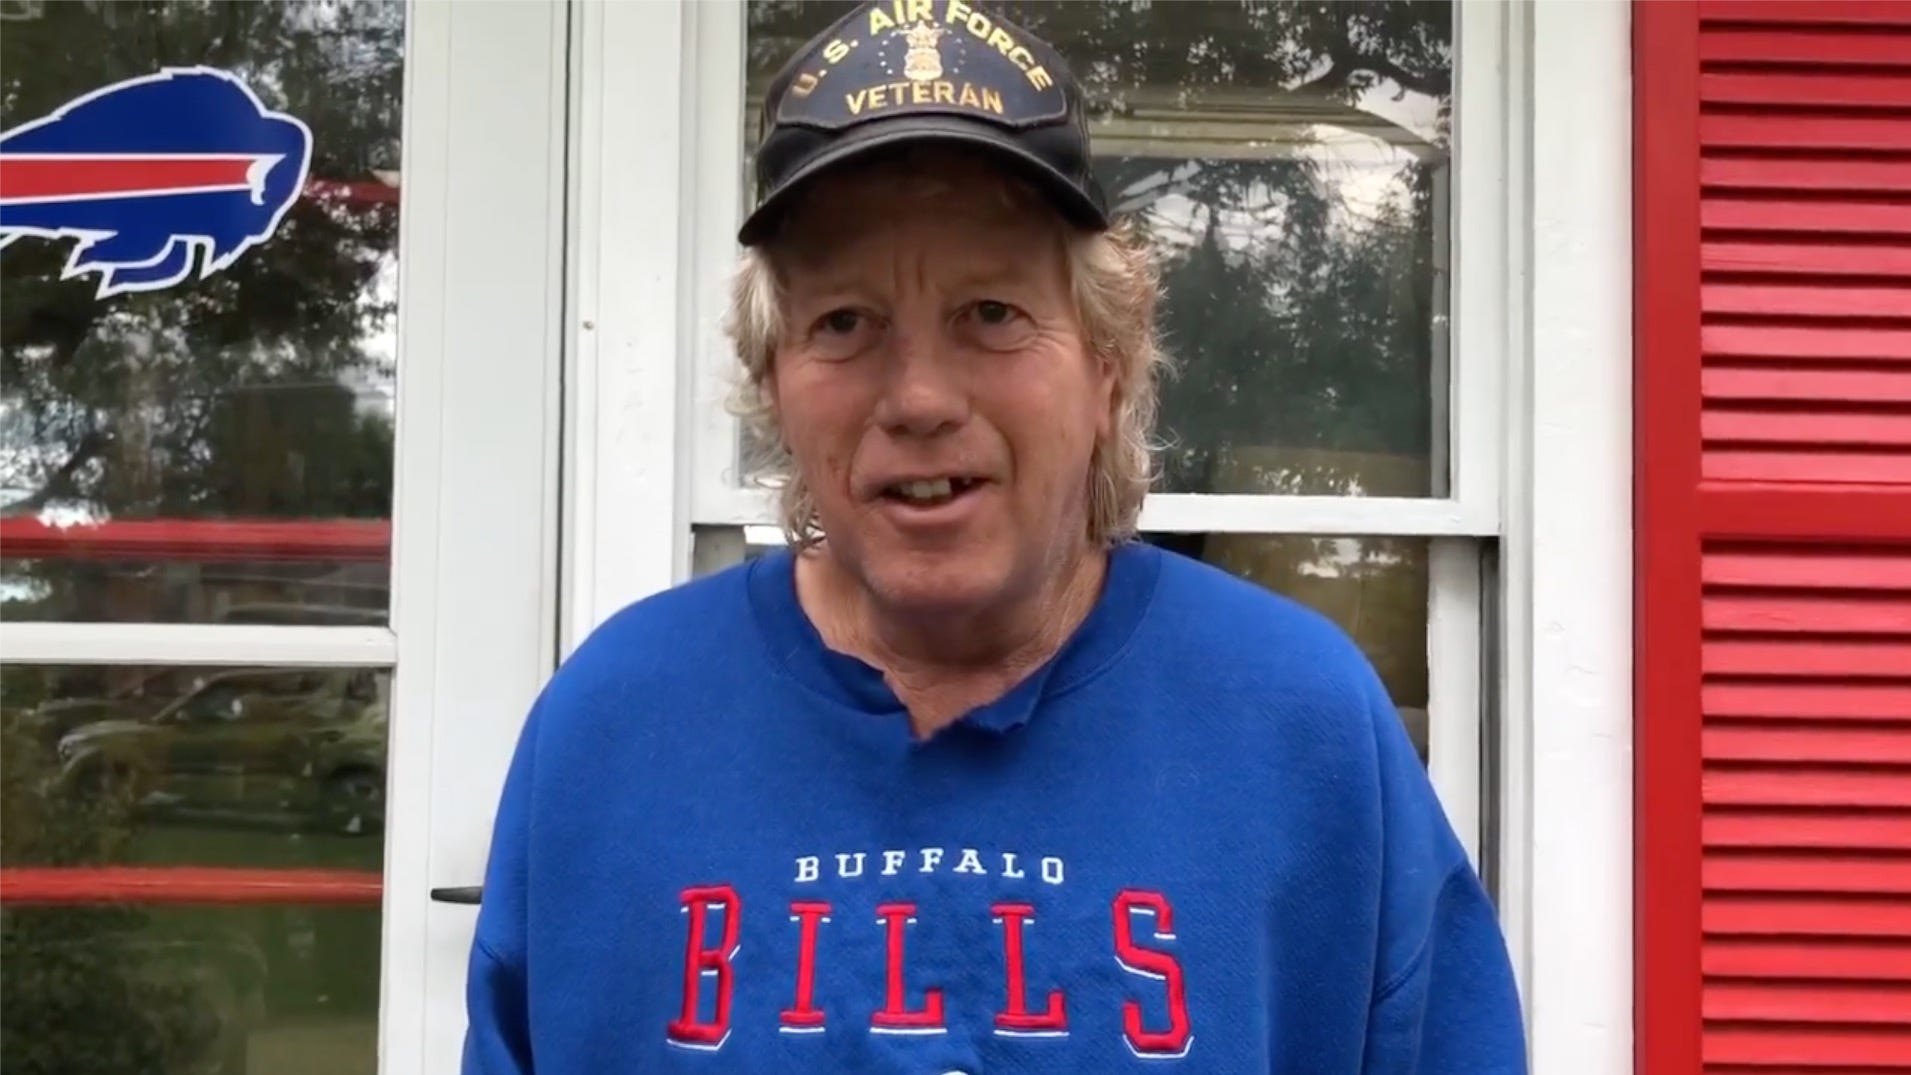 Bills Super Fan From Bloomfield Featured In Pepsi Commercial photo